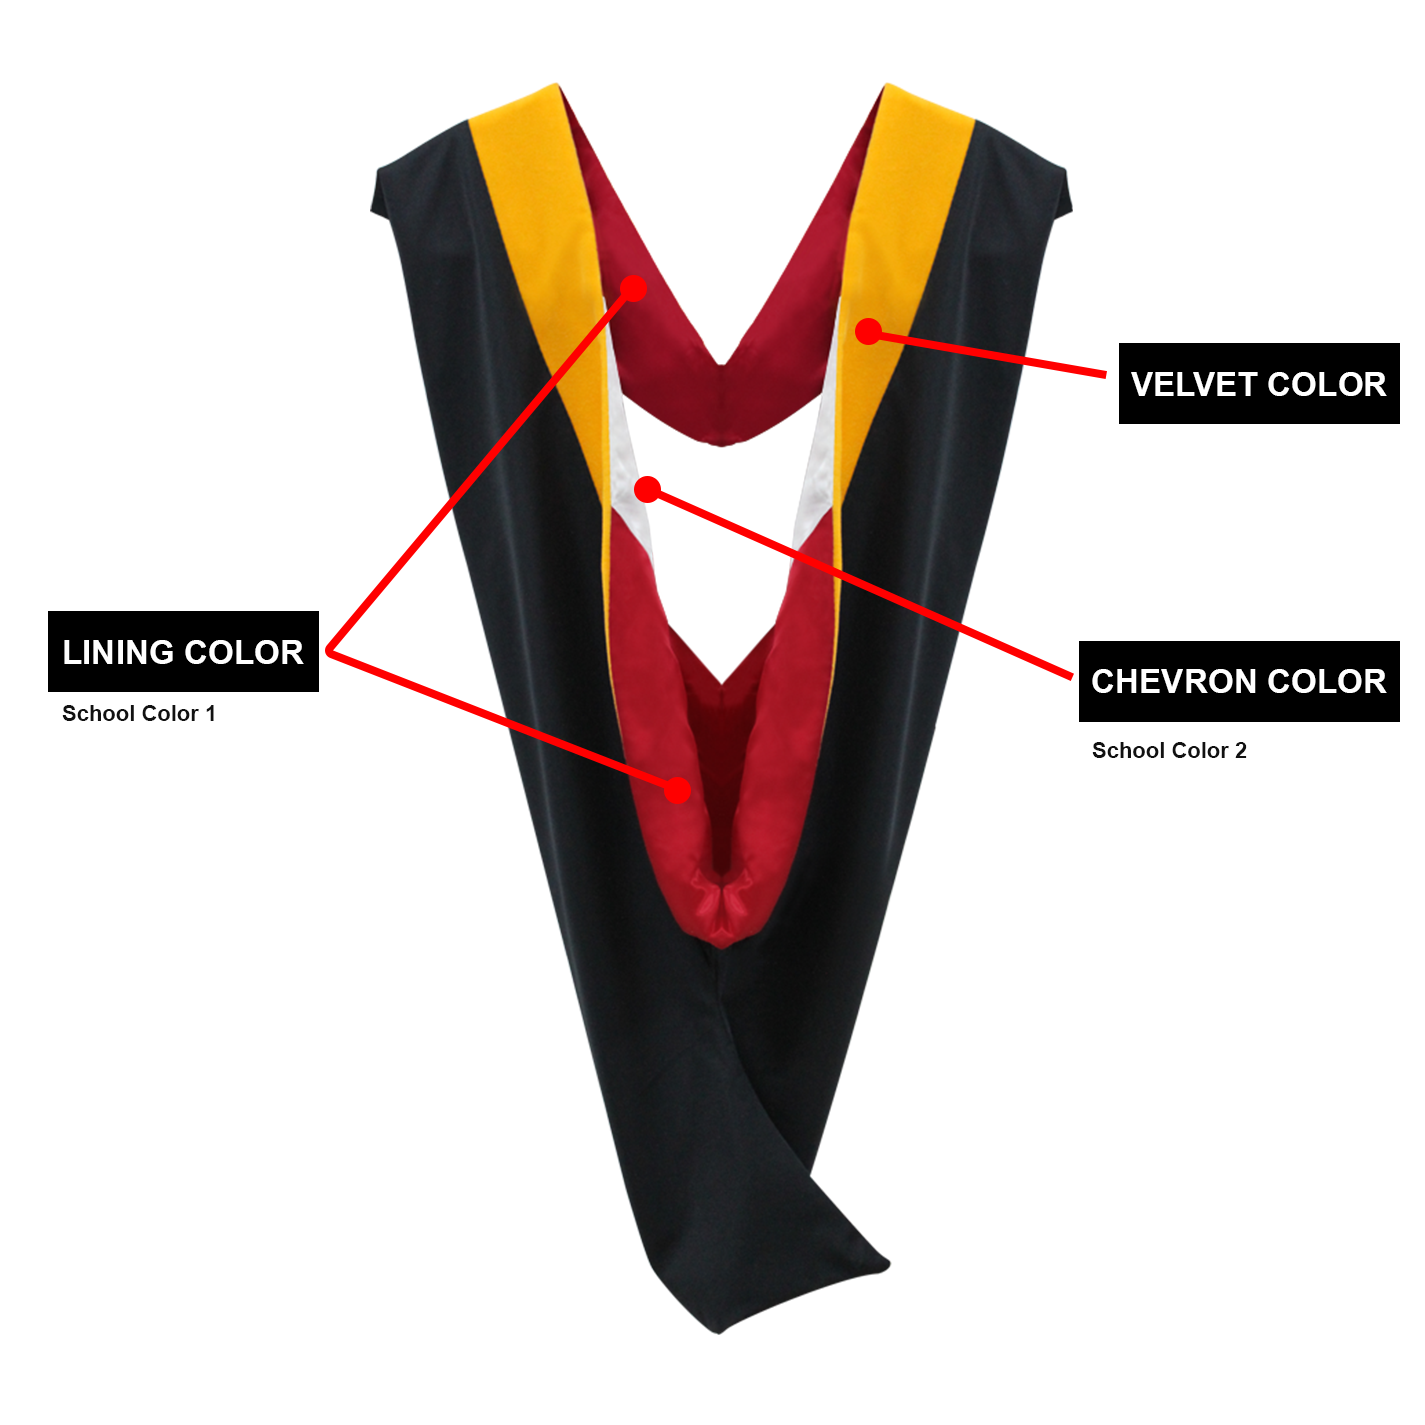 Academic dress in the United States - Wikipedia